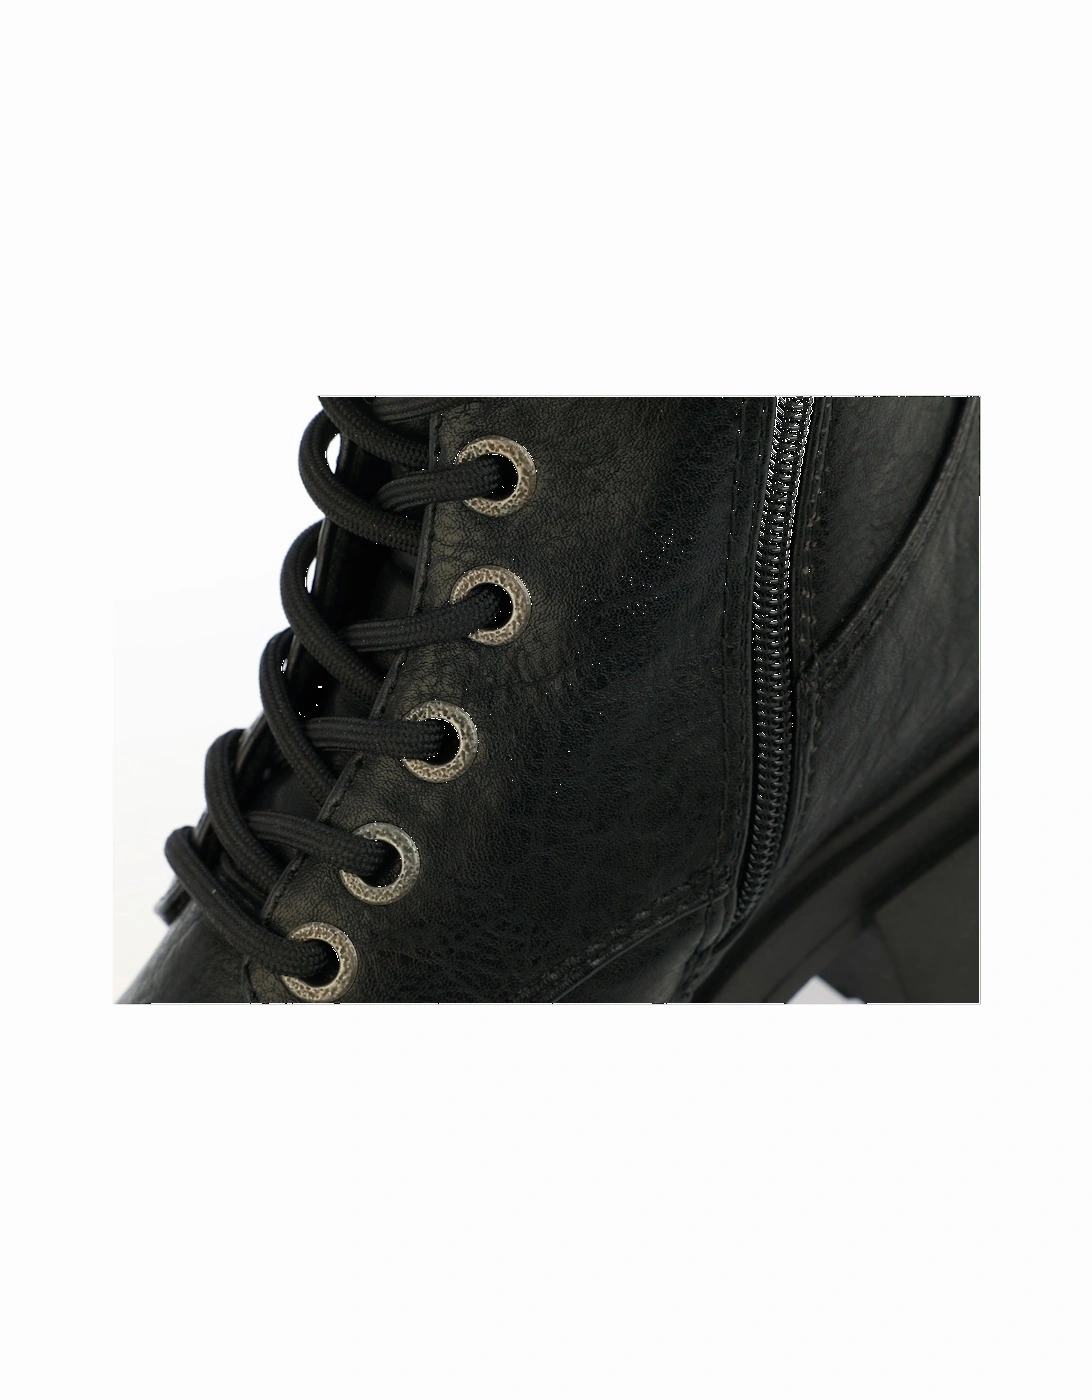 Womens Curfew Lace Up Boots